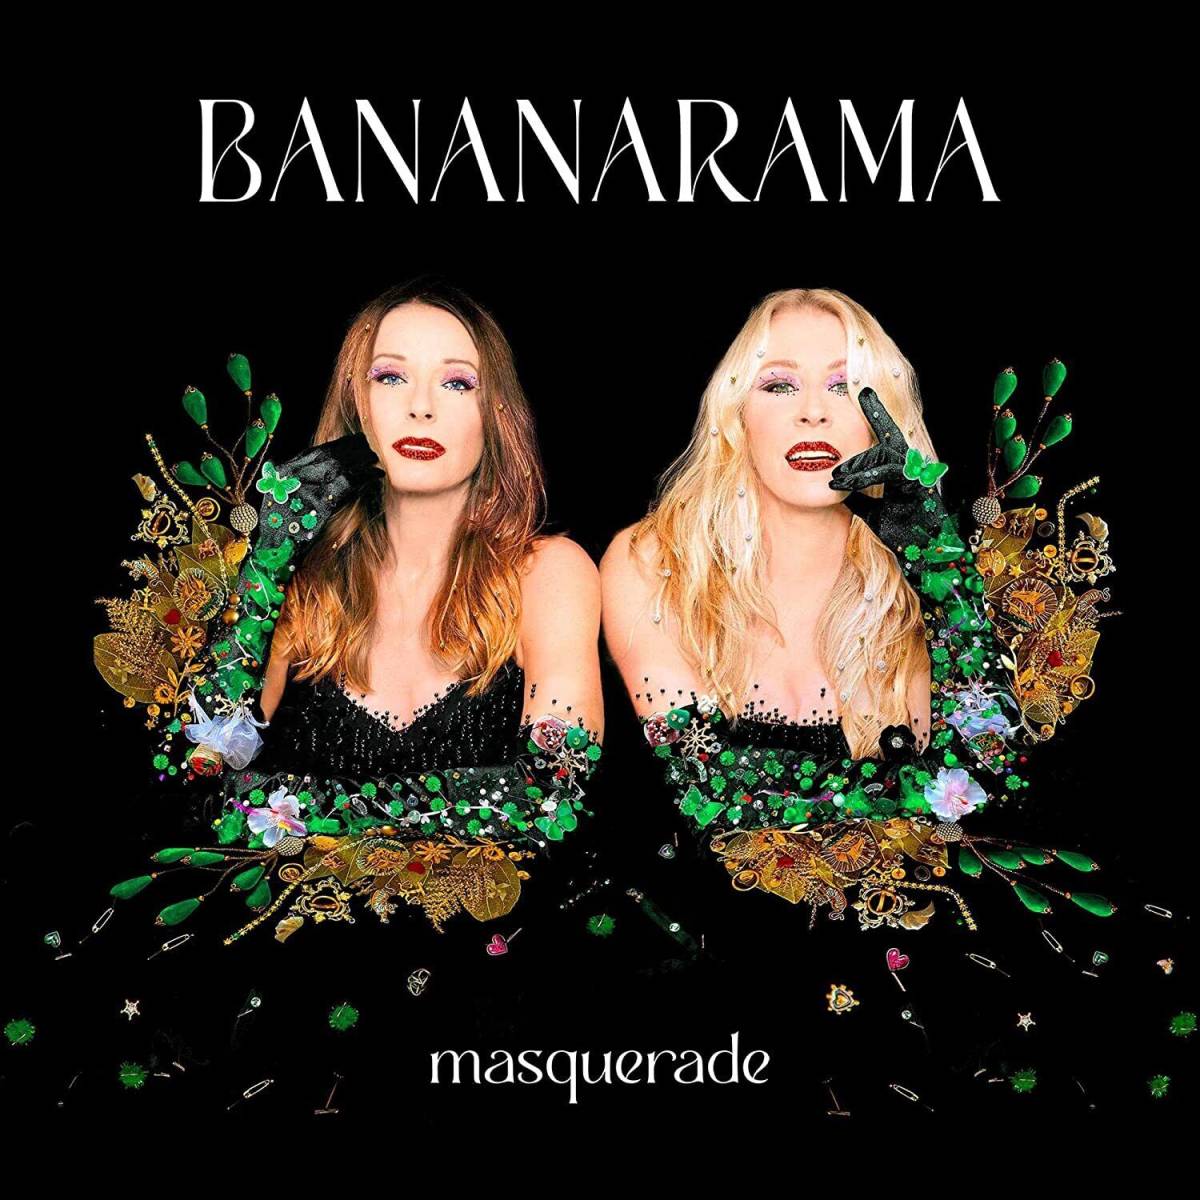 Bananarama Release New Album "Masquerade" 40 Years After First Single